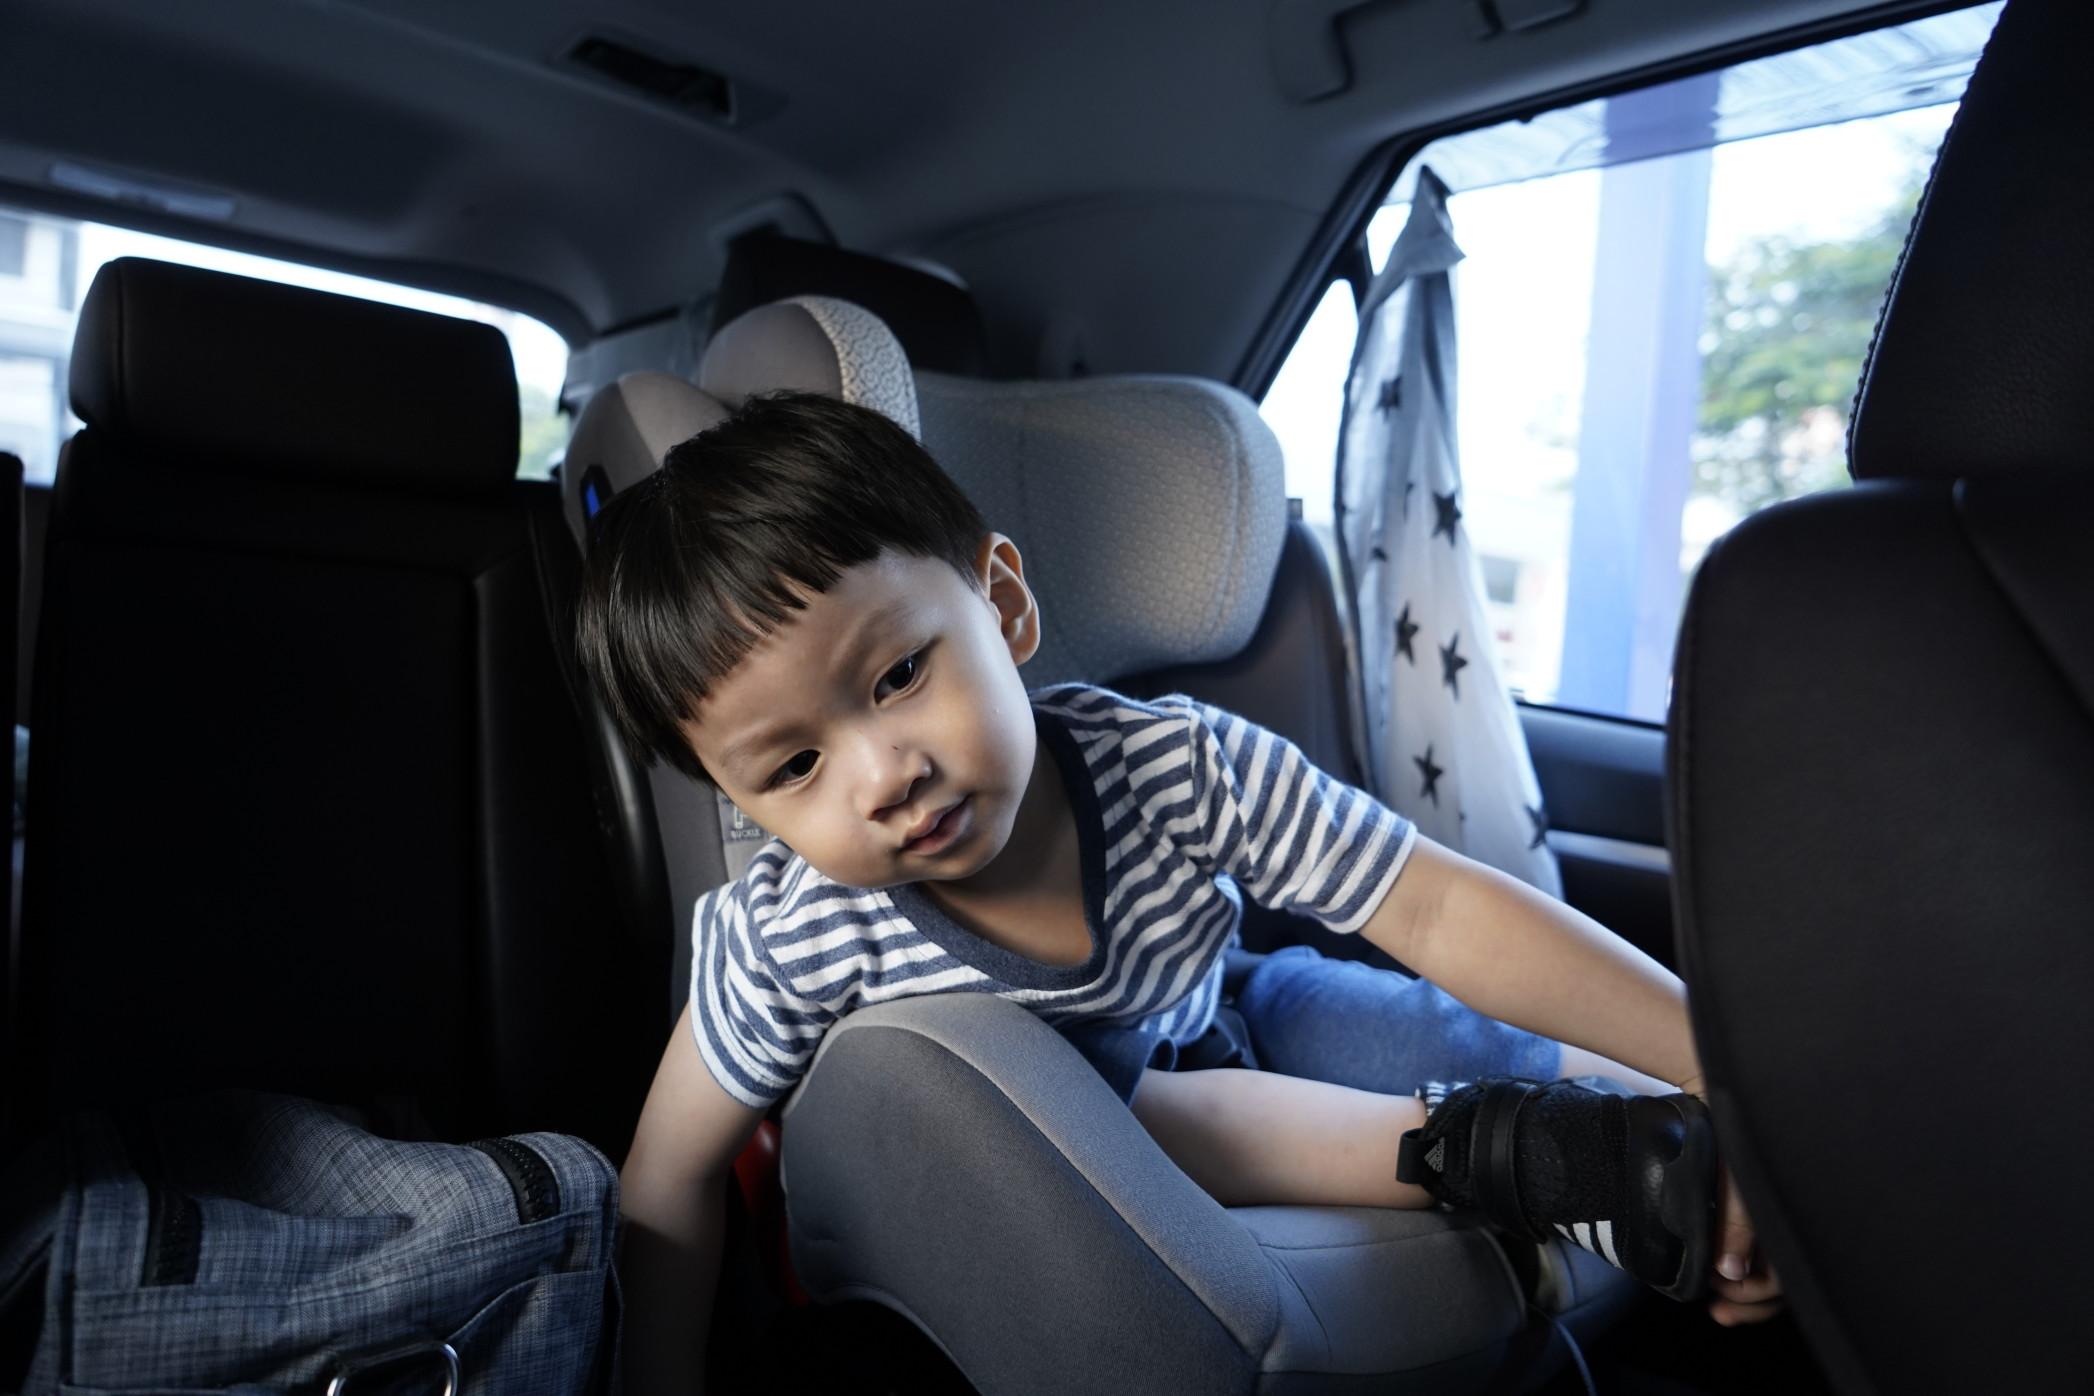 Car seats help keep children safe while you’re driving.